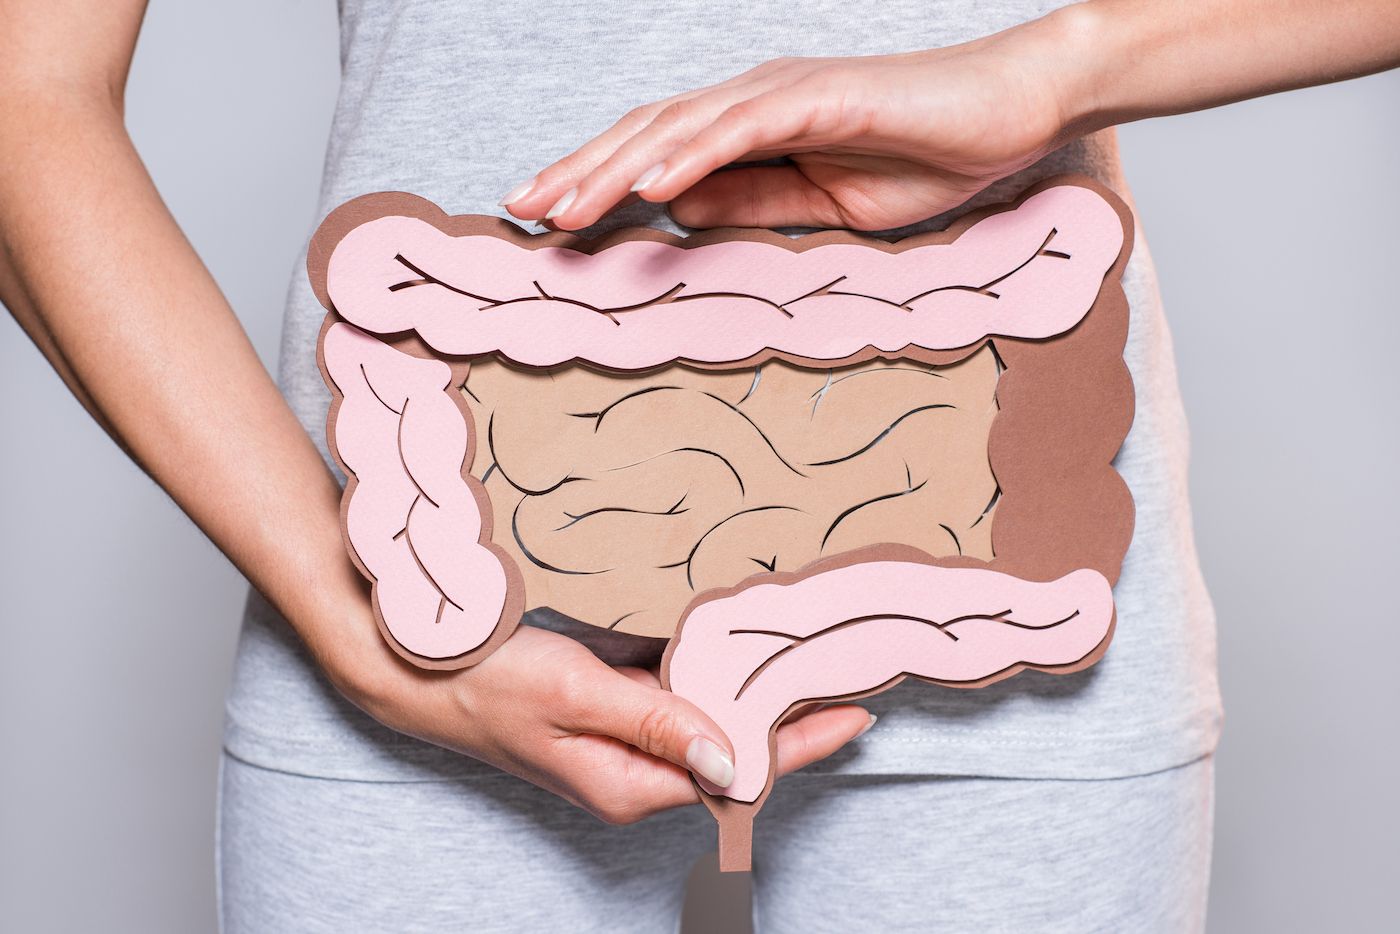 Changes occur in the makeup of our gut microbiota as we age, which can impact metabolism and our immune system. GETTY